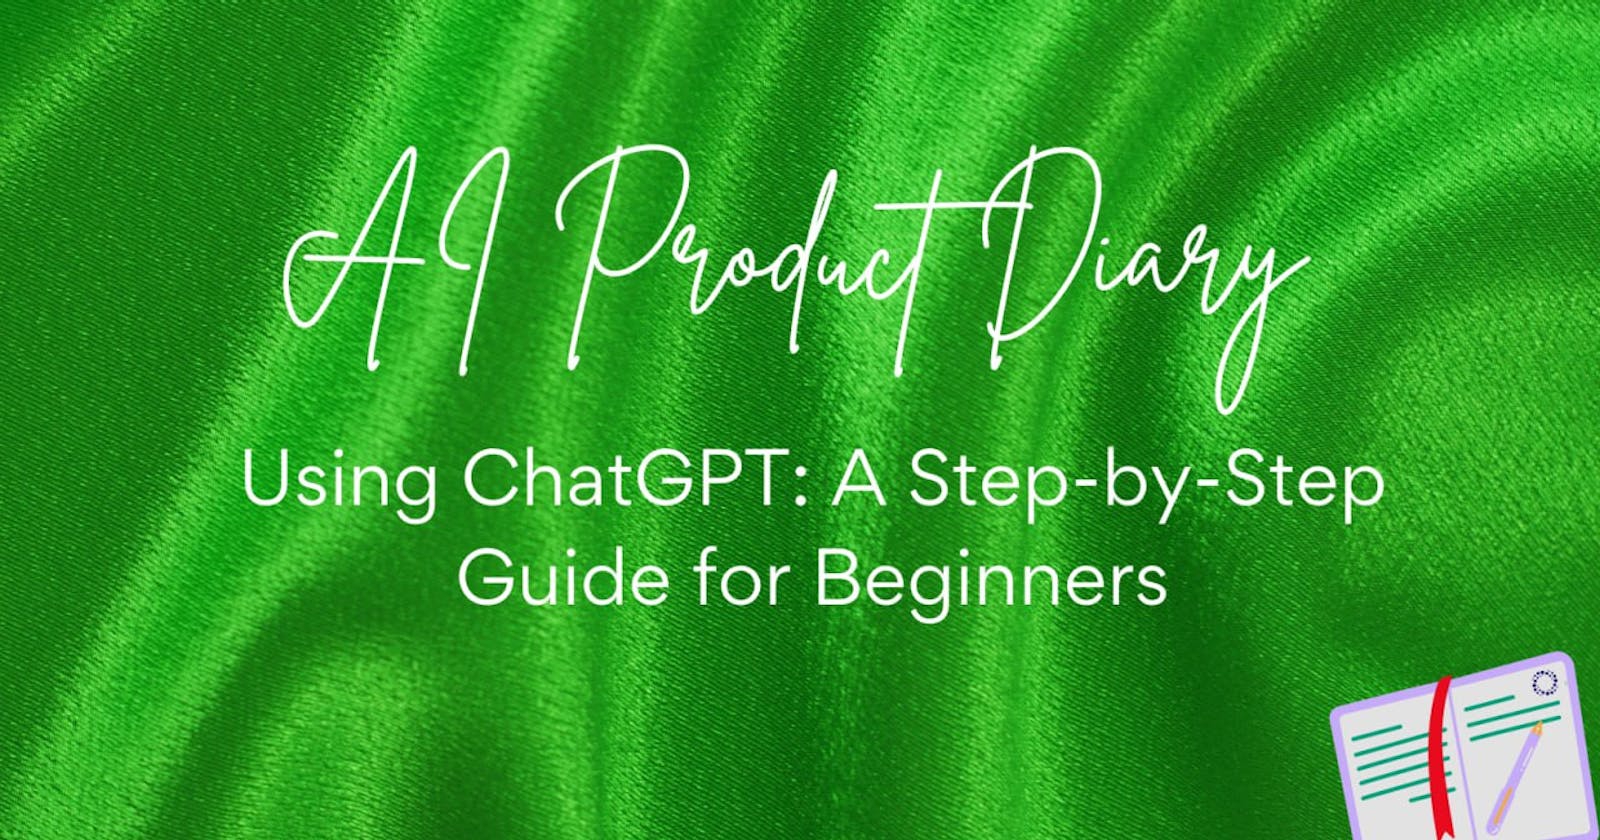 Using ChatGPT: A Step-by-Step Guide for Beginners